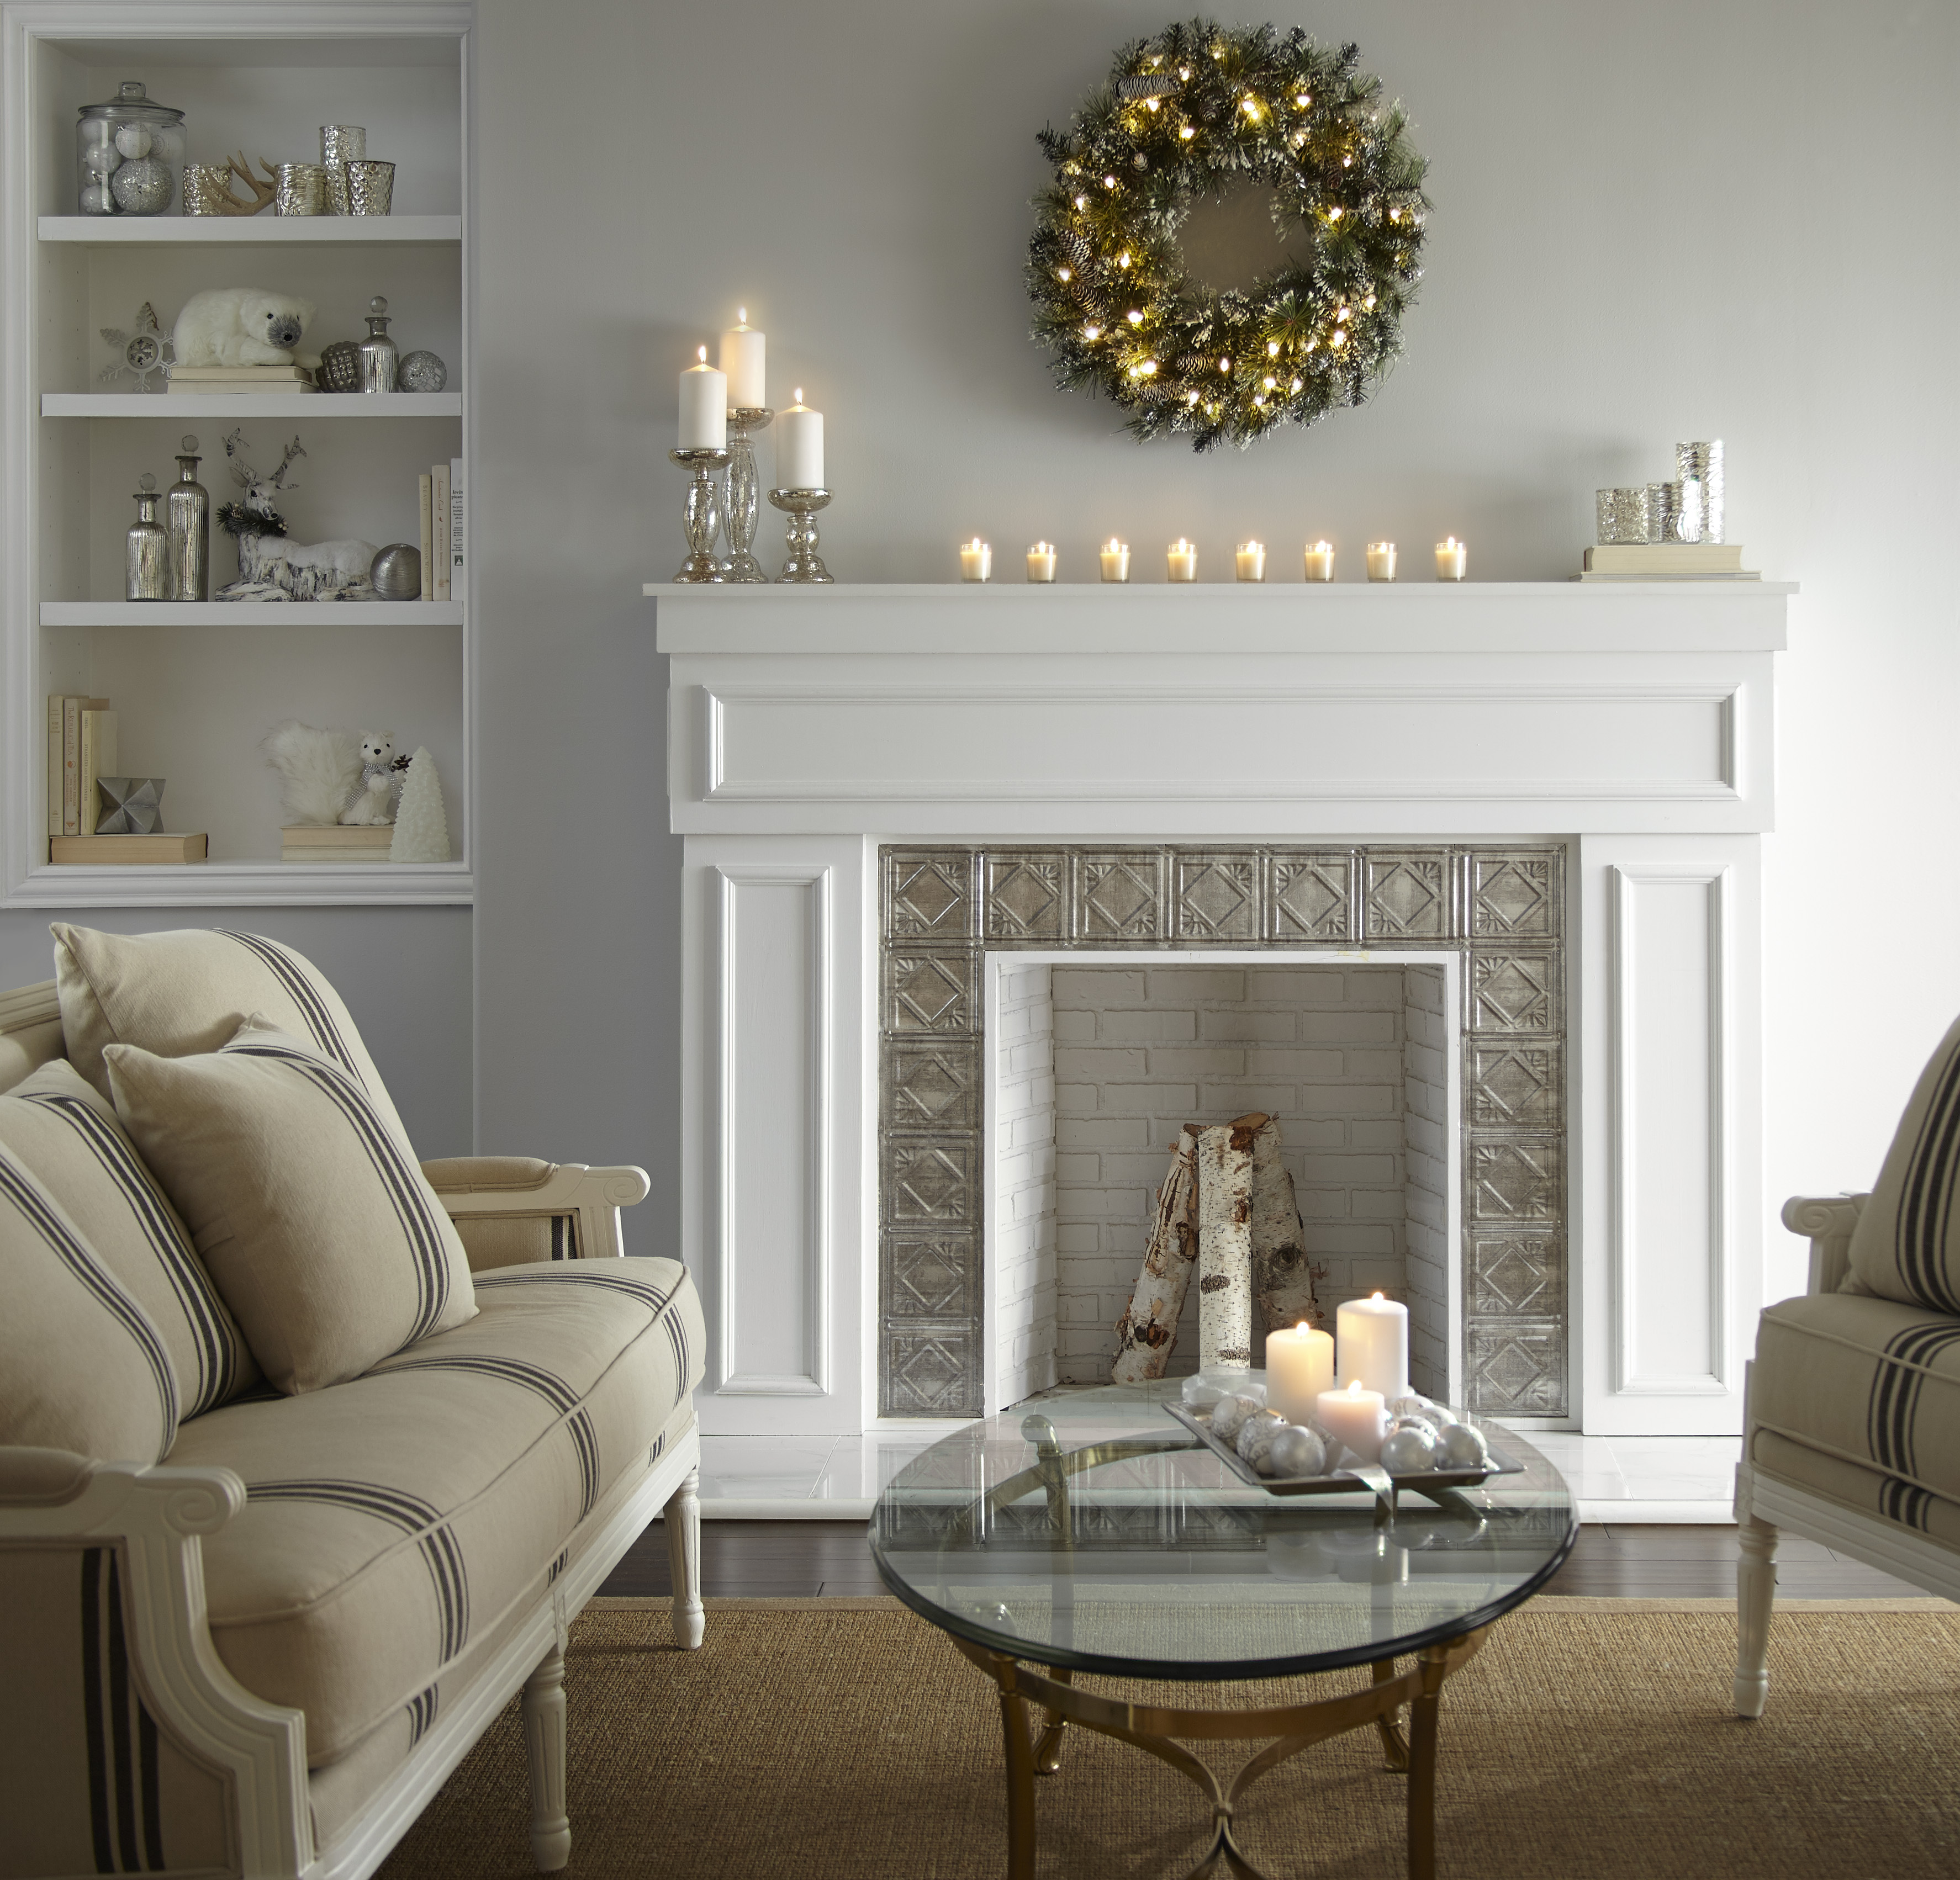 A white living room with a white fireplace, styled with a holiday wreath and candles on the mantle 